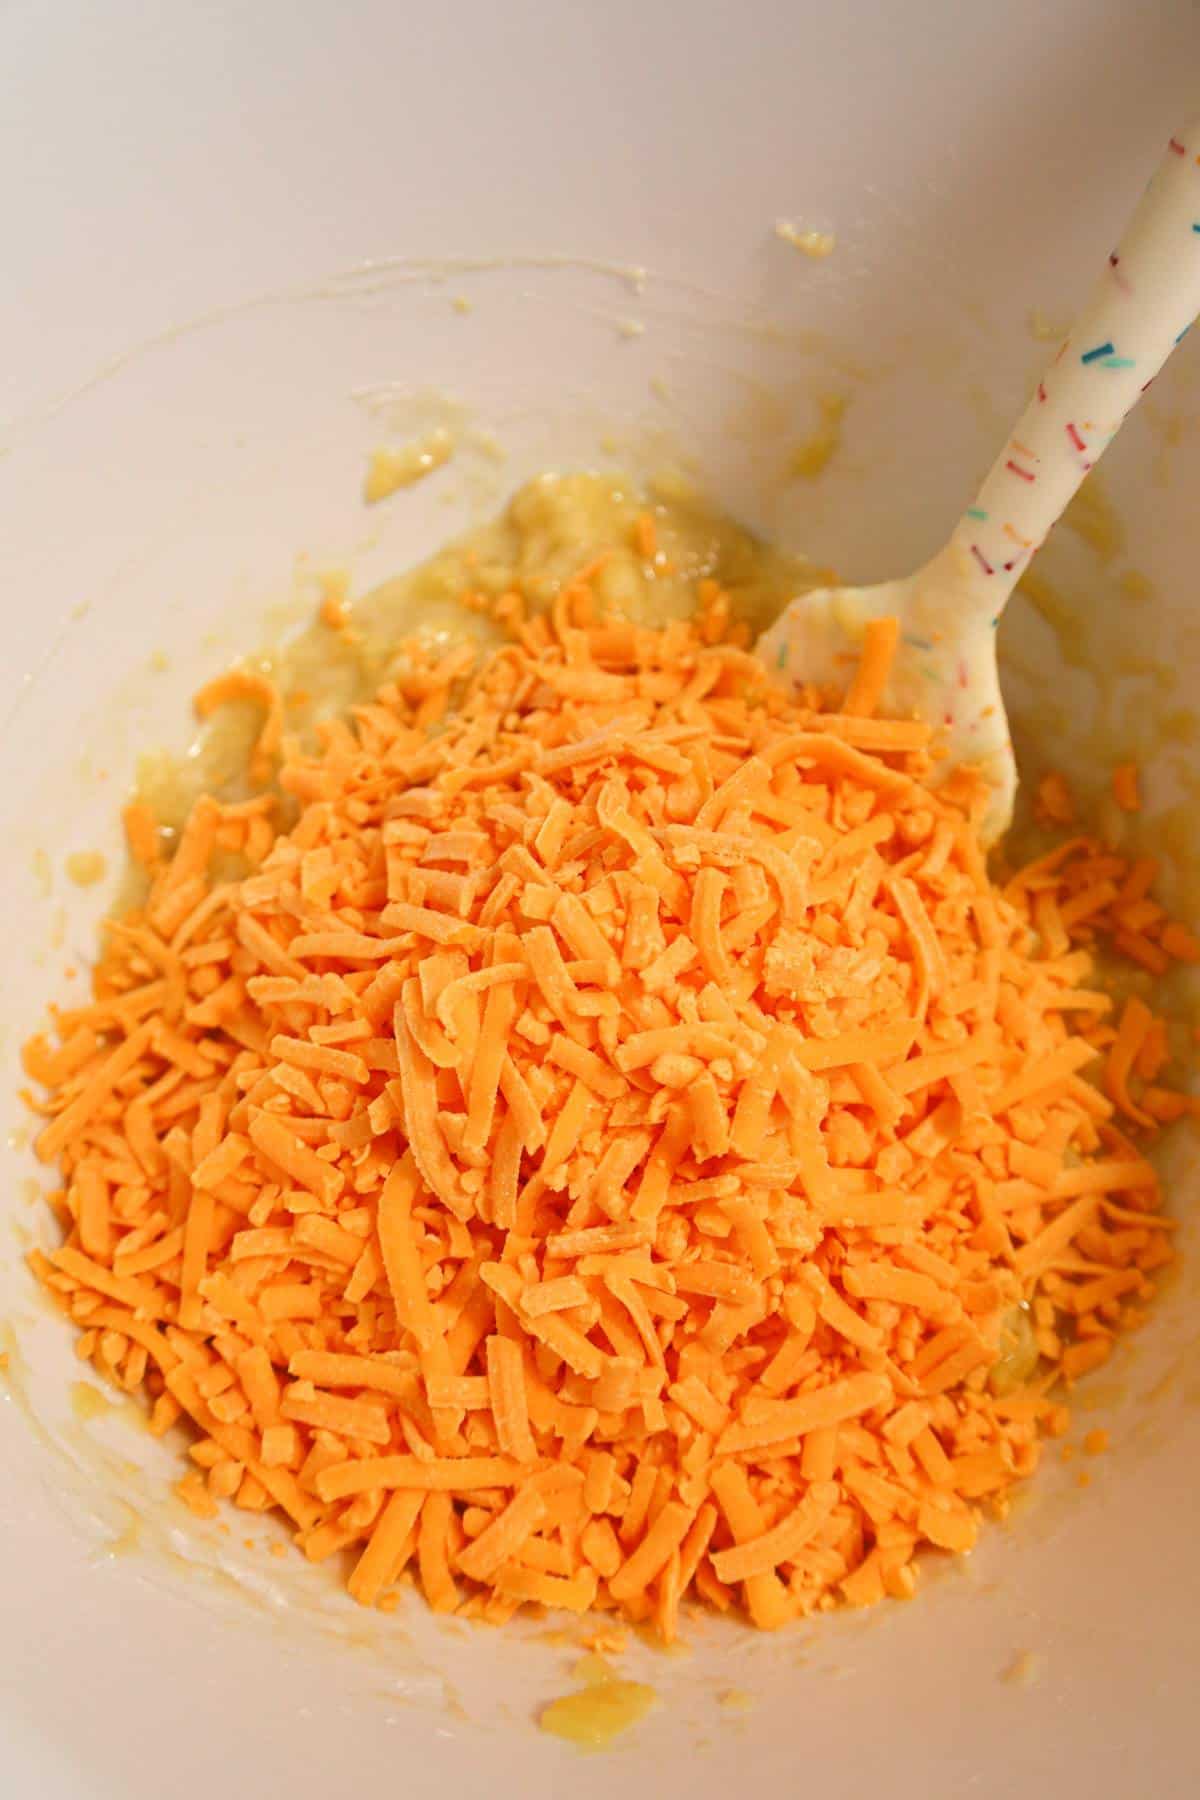 shredded cheddar cheese on top of pineapple mixture in a mixing bowl